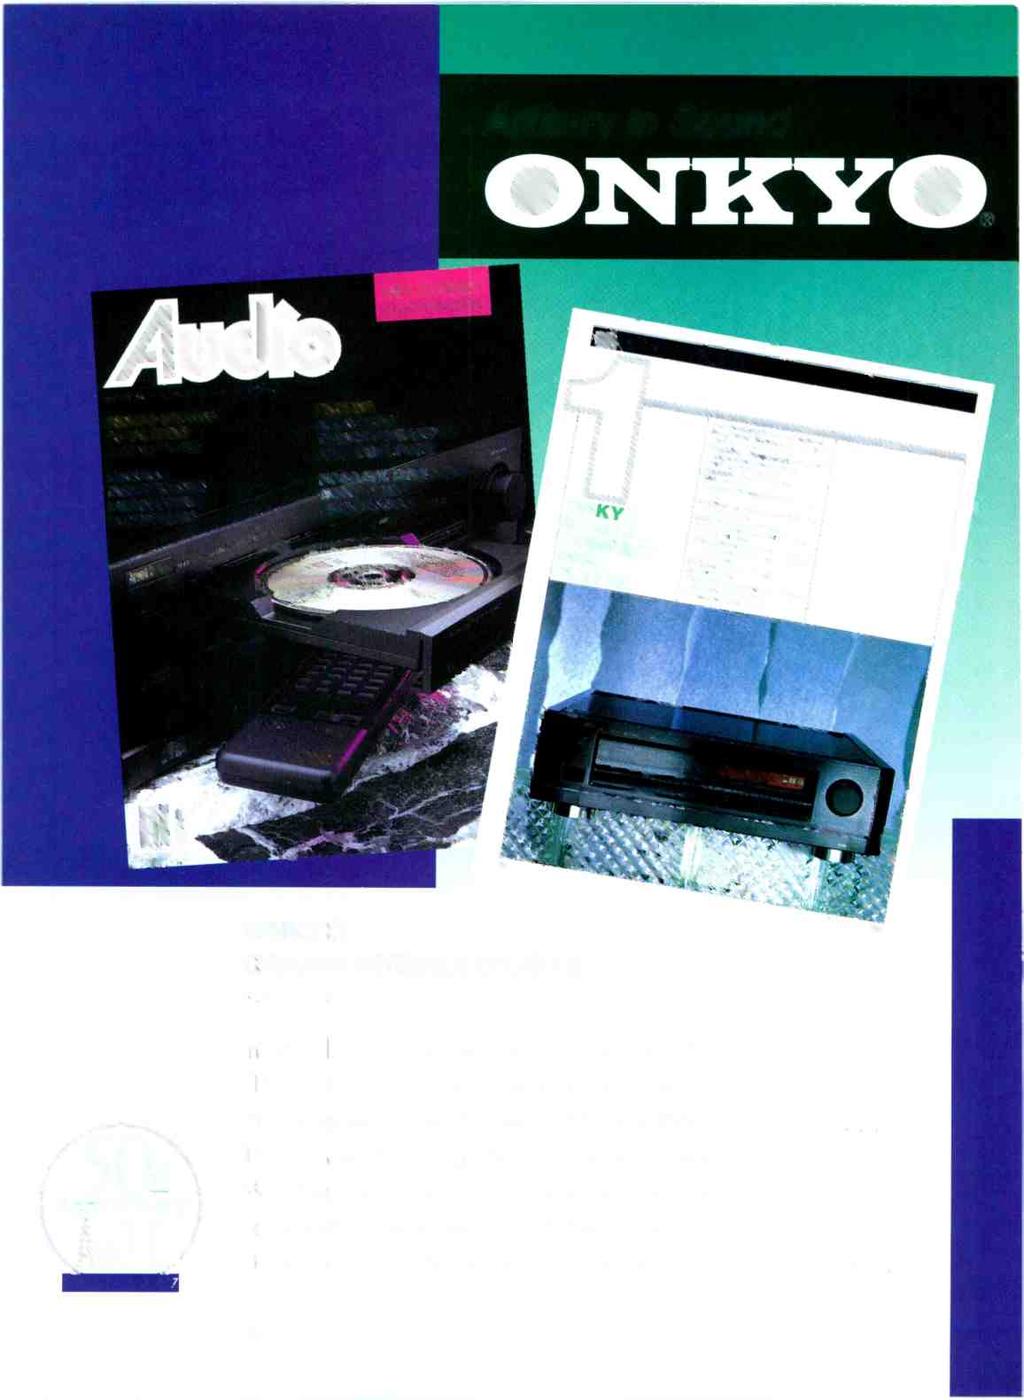 i Artistry in Sound ONKYO UNDERSTANDING ',ARCS '989 US 52 75 - VK 2.00 C00 52.95 ONKYO DX -G10 CD PLAYER A DELIGHT TO USE NoNoise PROCESSING FROM SONIC SOLUTIONS <, TESTED a.